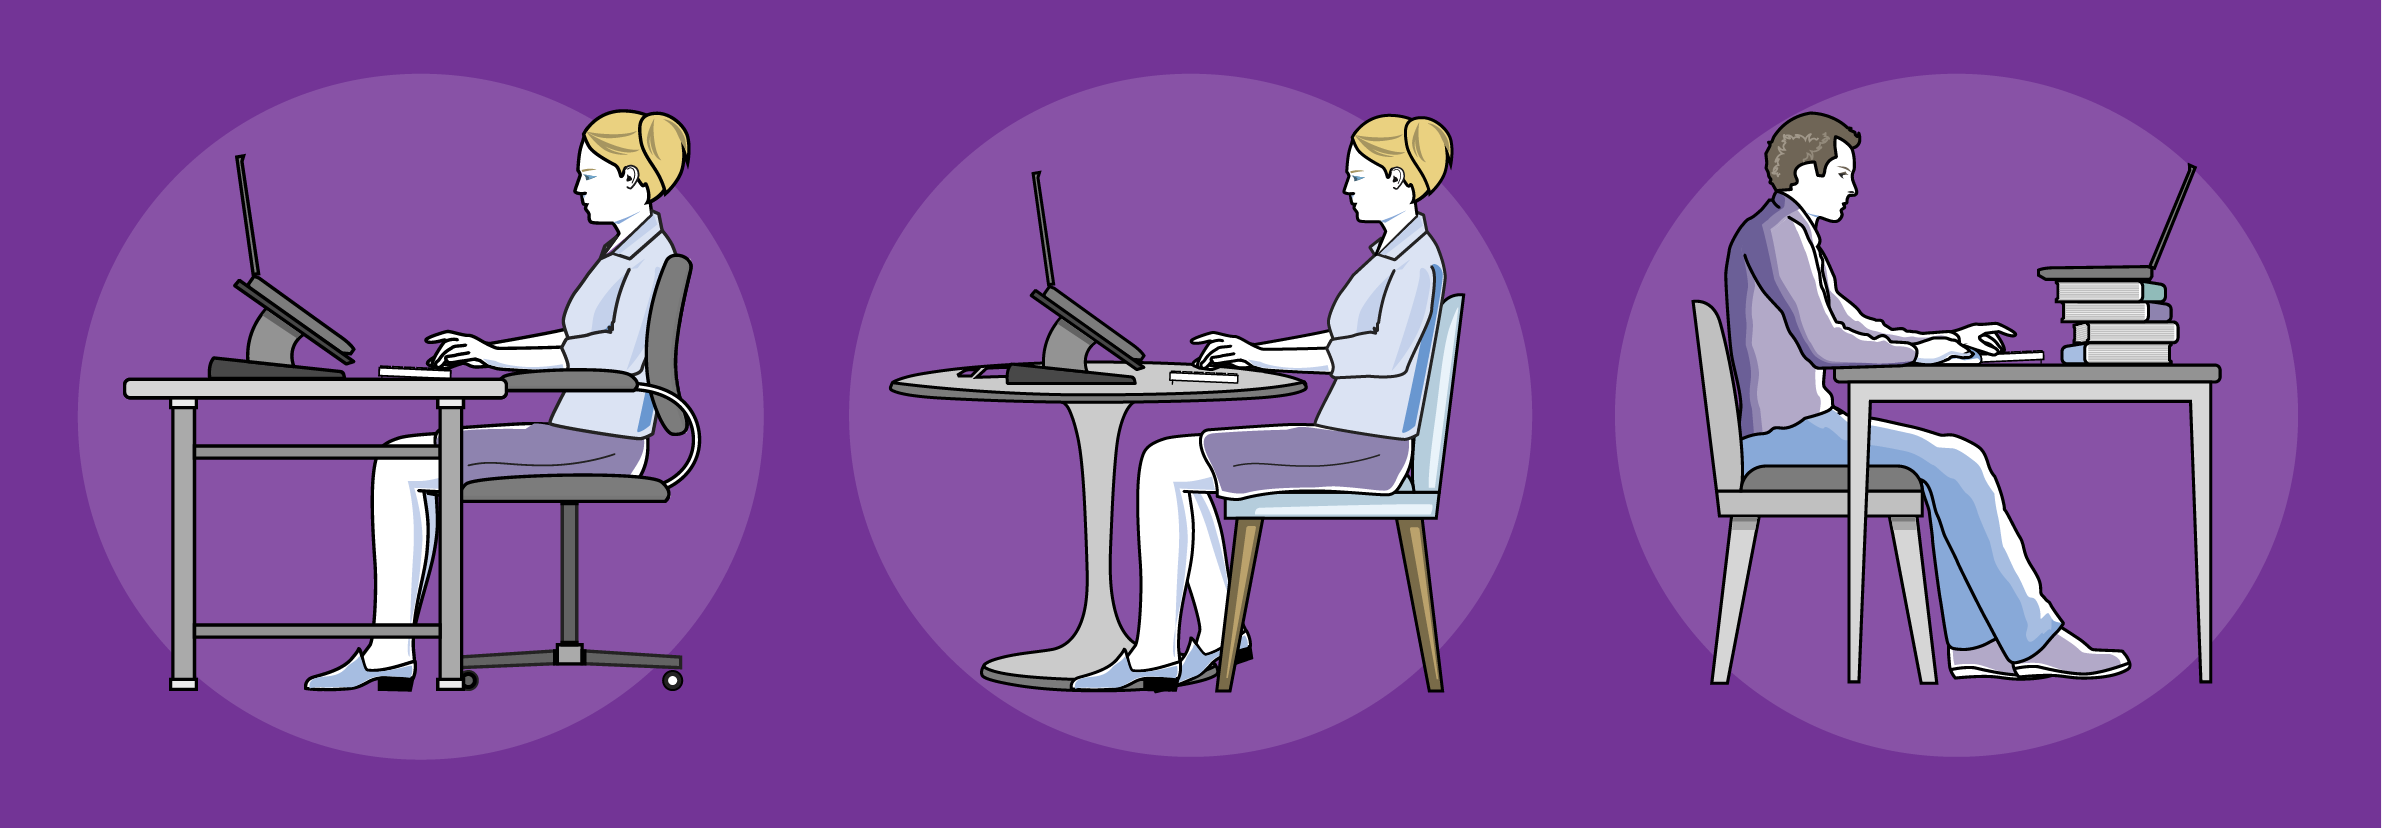 Our top tips for working at home - Stretching exercises - System Concepts  Ltd. Making places, products and services more usable, accessible and safe.